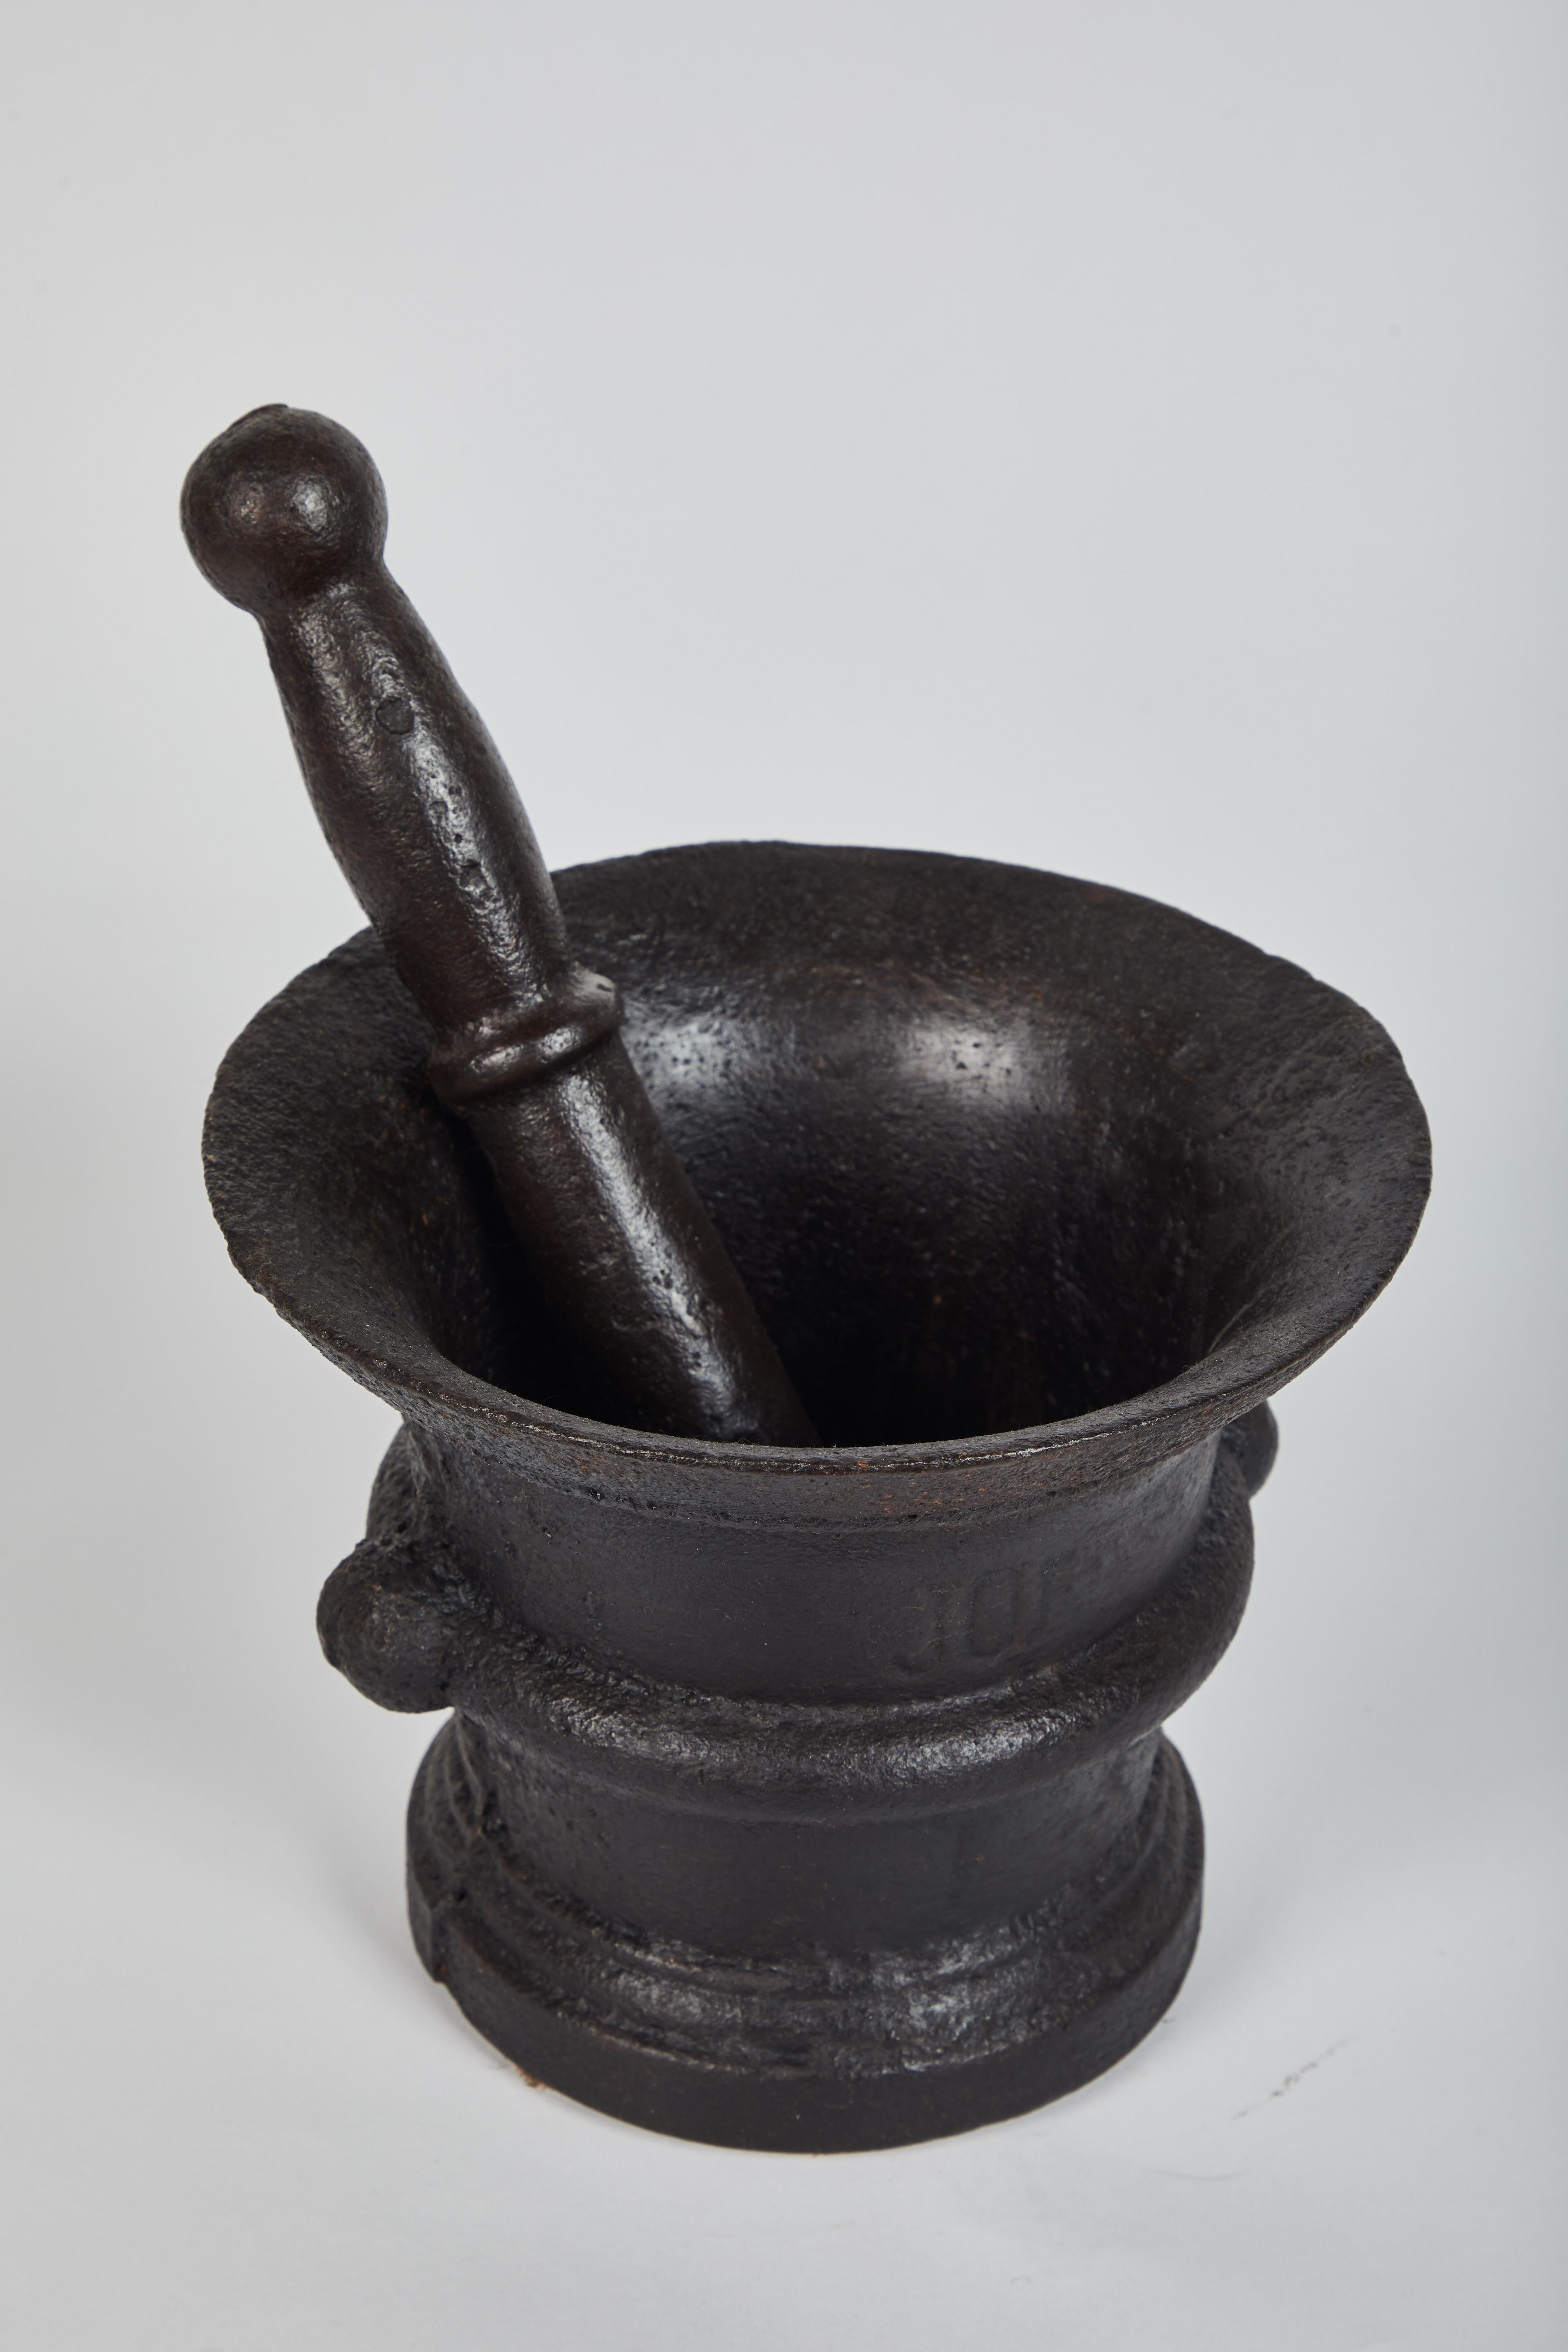 An early 1900s Indonesian cast iron mortar and pestle, set of three sizes. Heavy base with matching pestle. From Java, Indonesia. Primarily used for the grinding of coffee beans.
Size:
Large 6.25